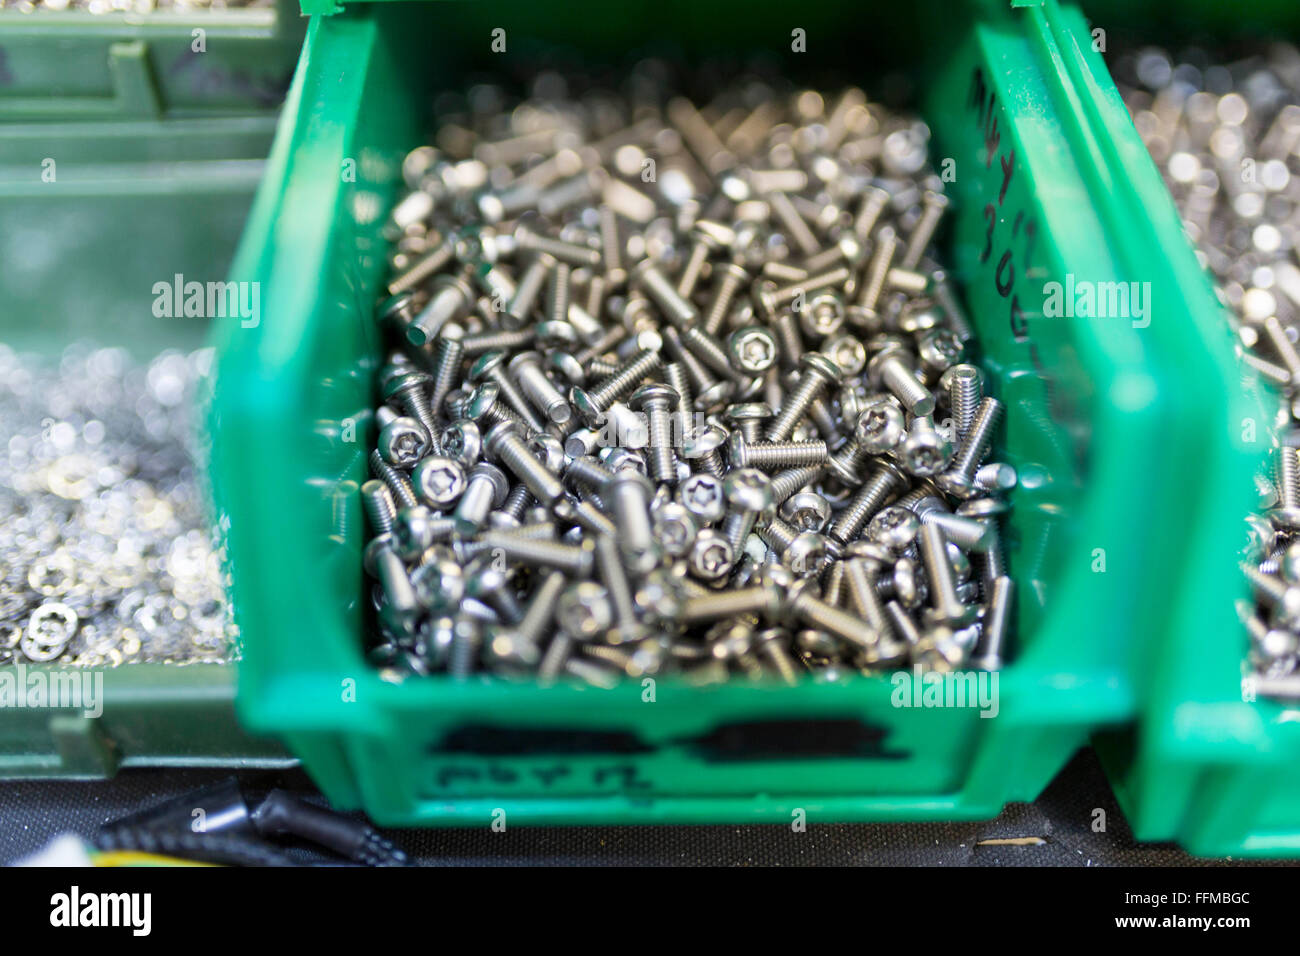 screws in a green box in an electronics factory Stock Photo